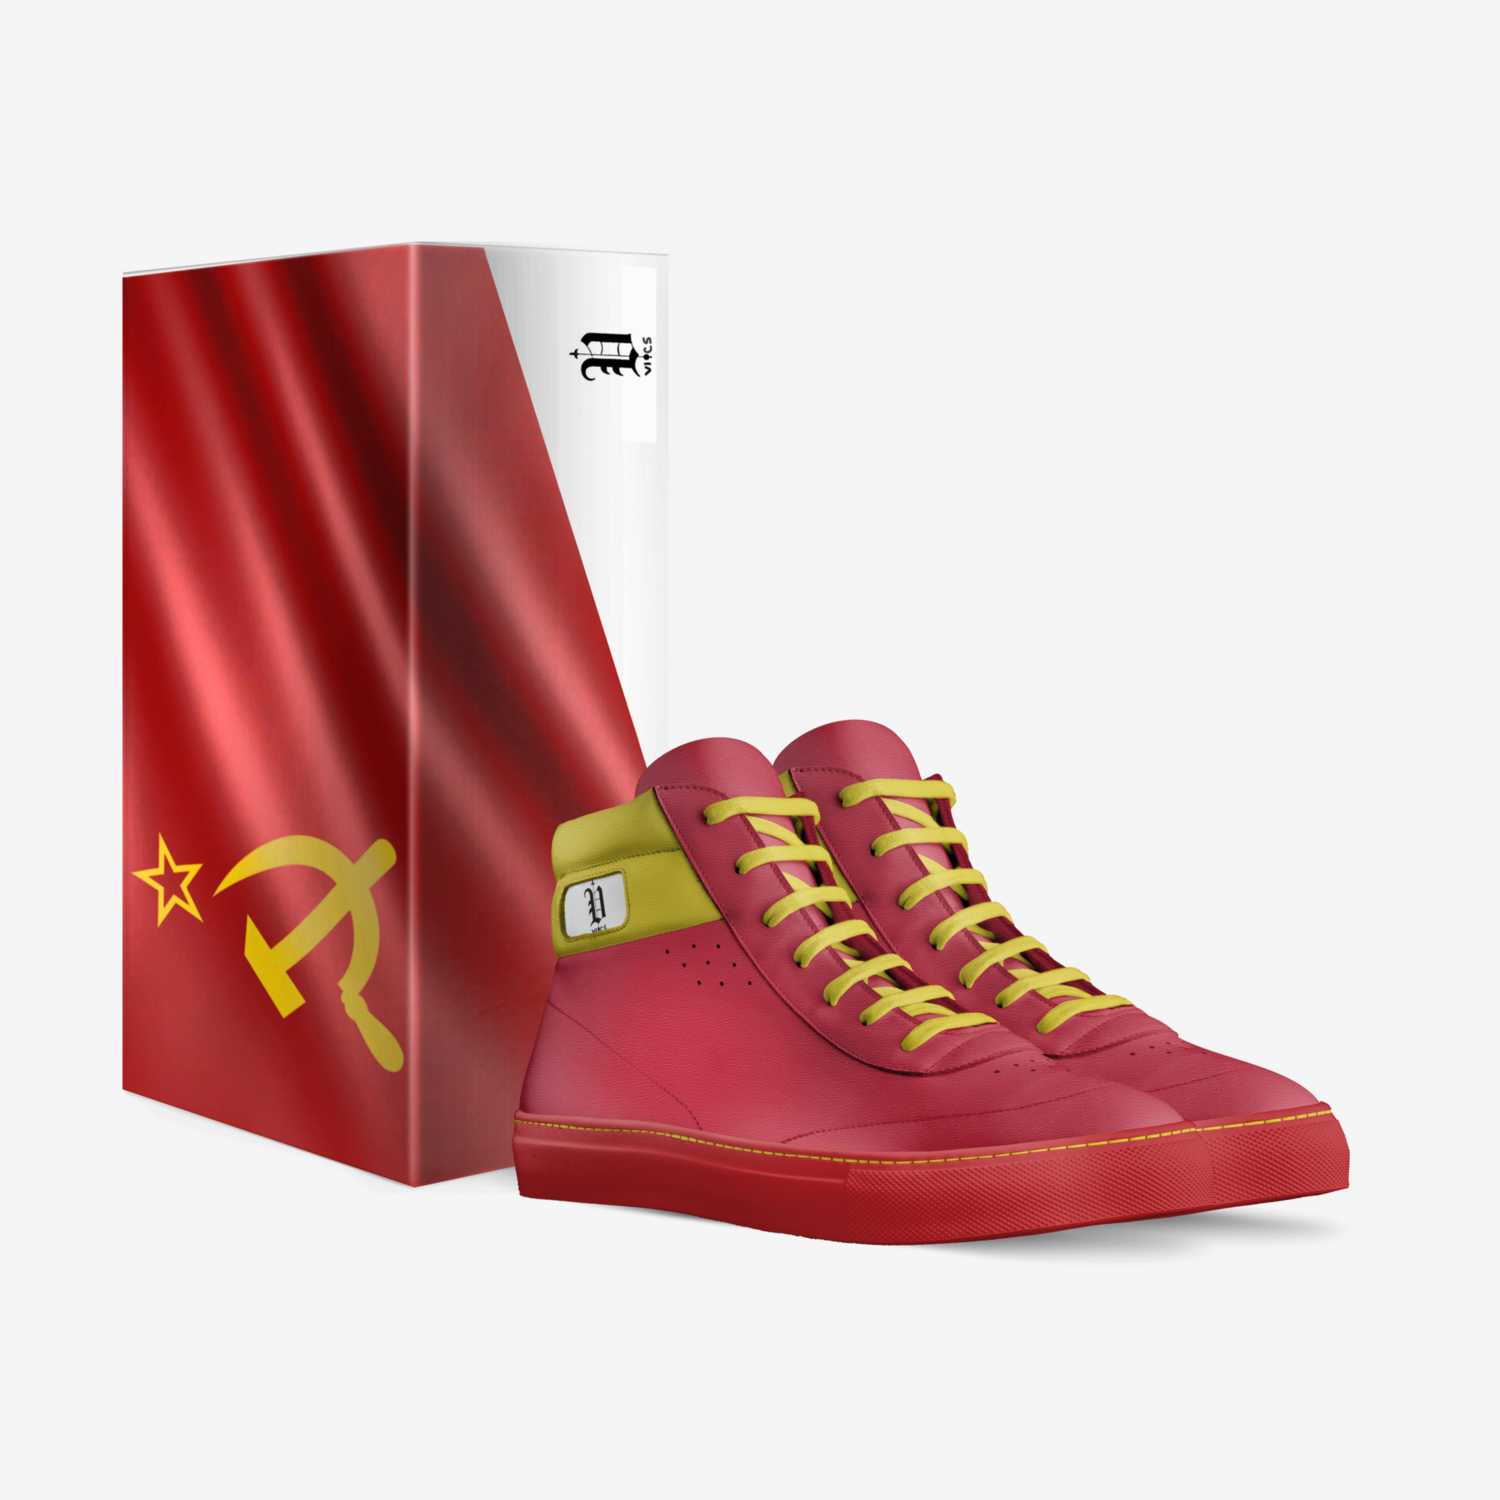 vics USSR custom made in Italy shoes by Brayden Murphy | Box view